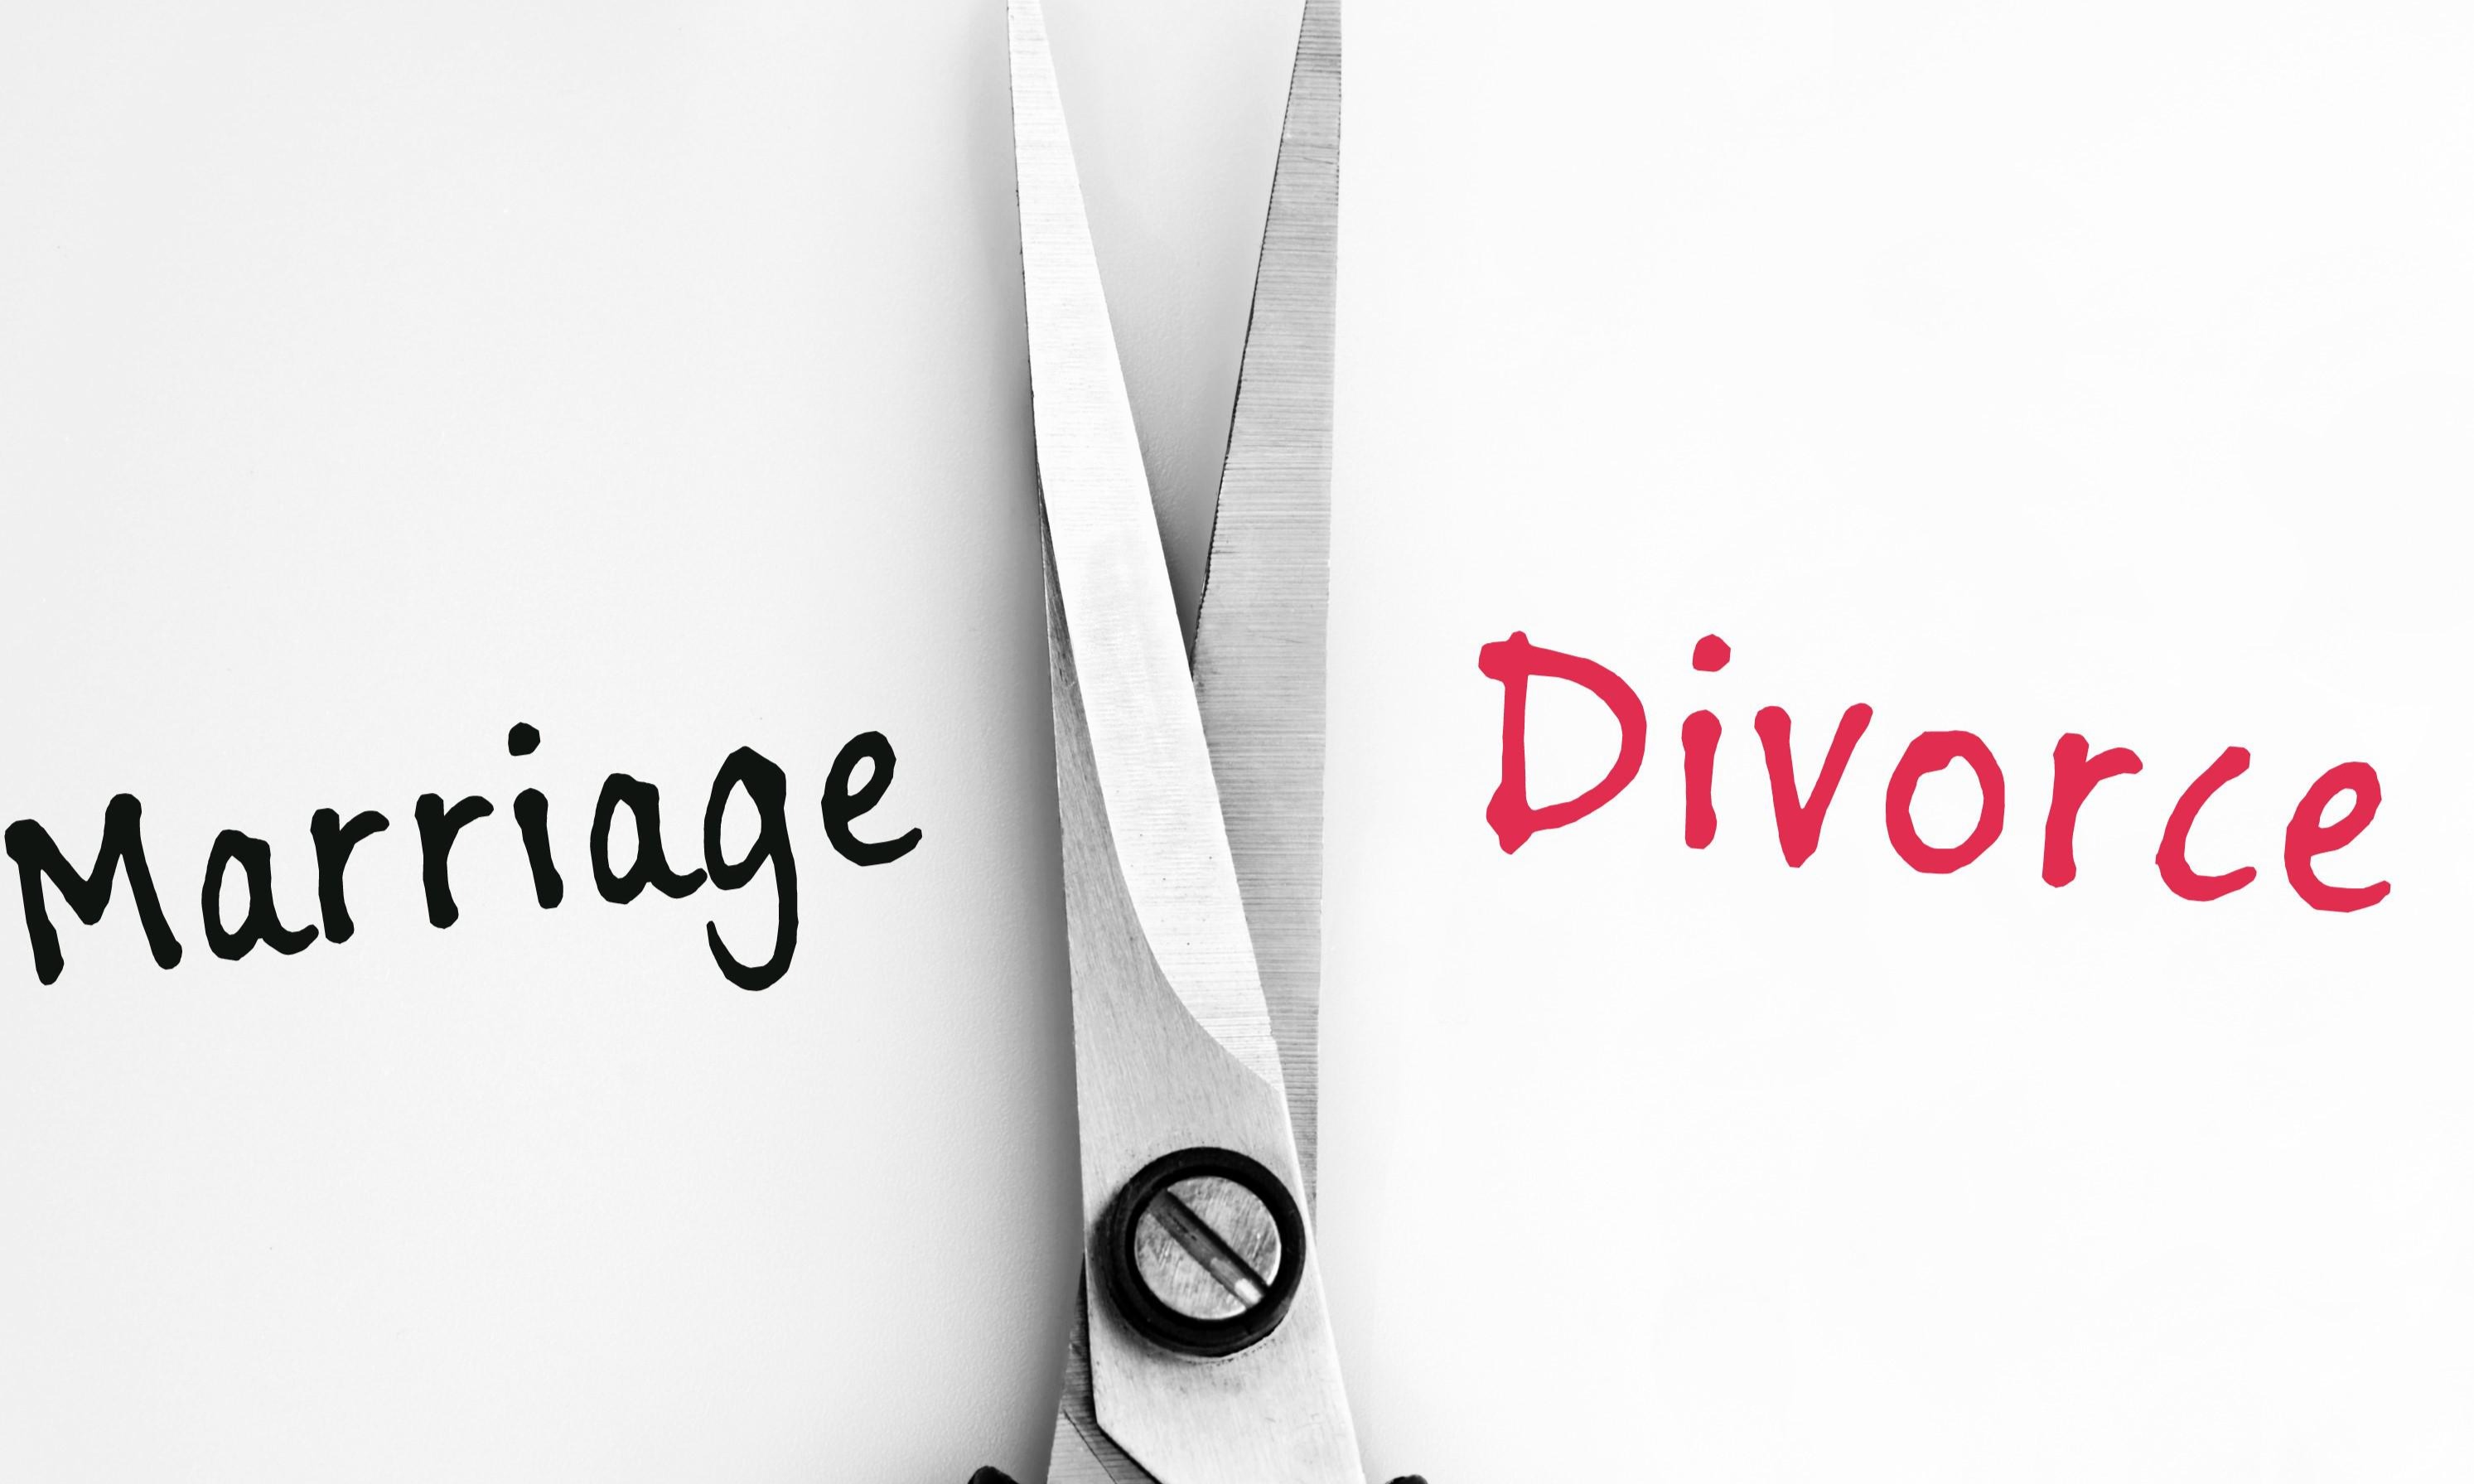 Sometimes a marriage ends in divorce. Contact Jarbath PenÌa Law Group PA if you are considering divorce.